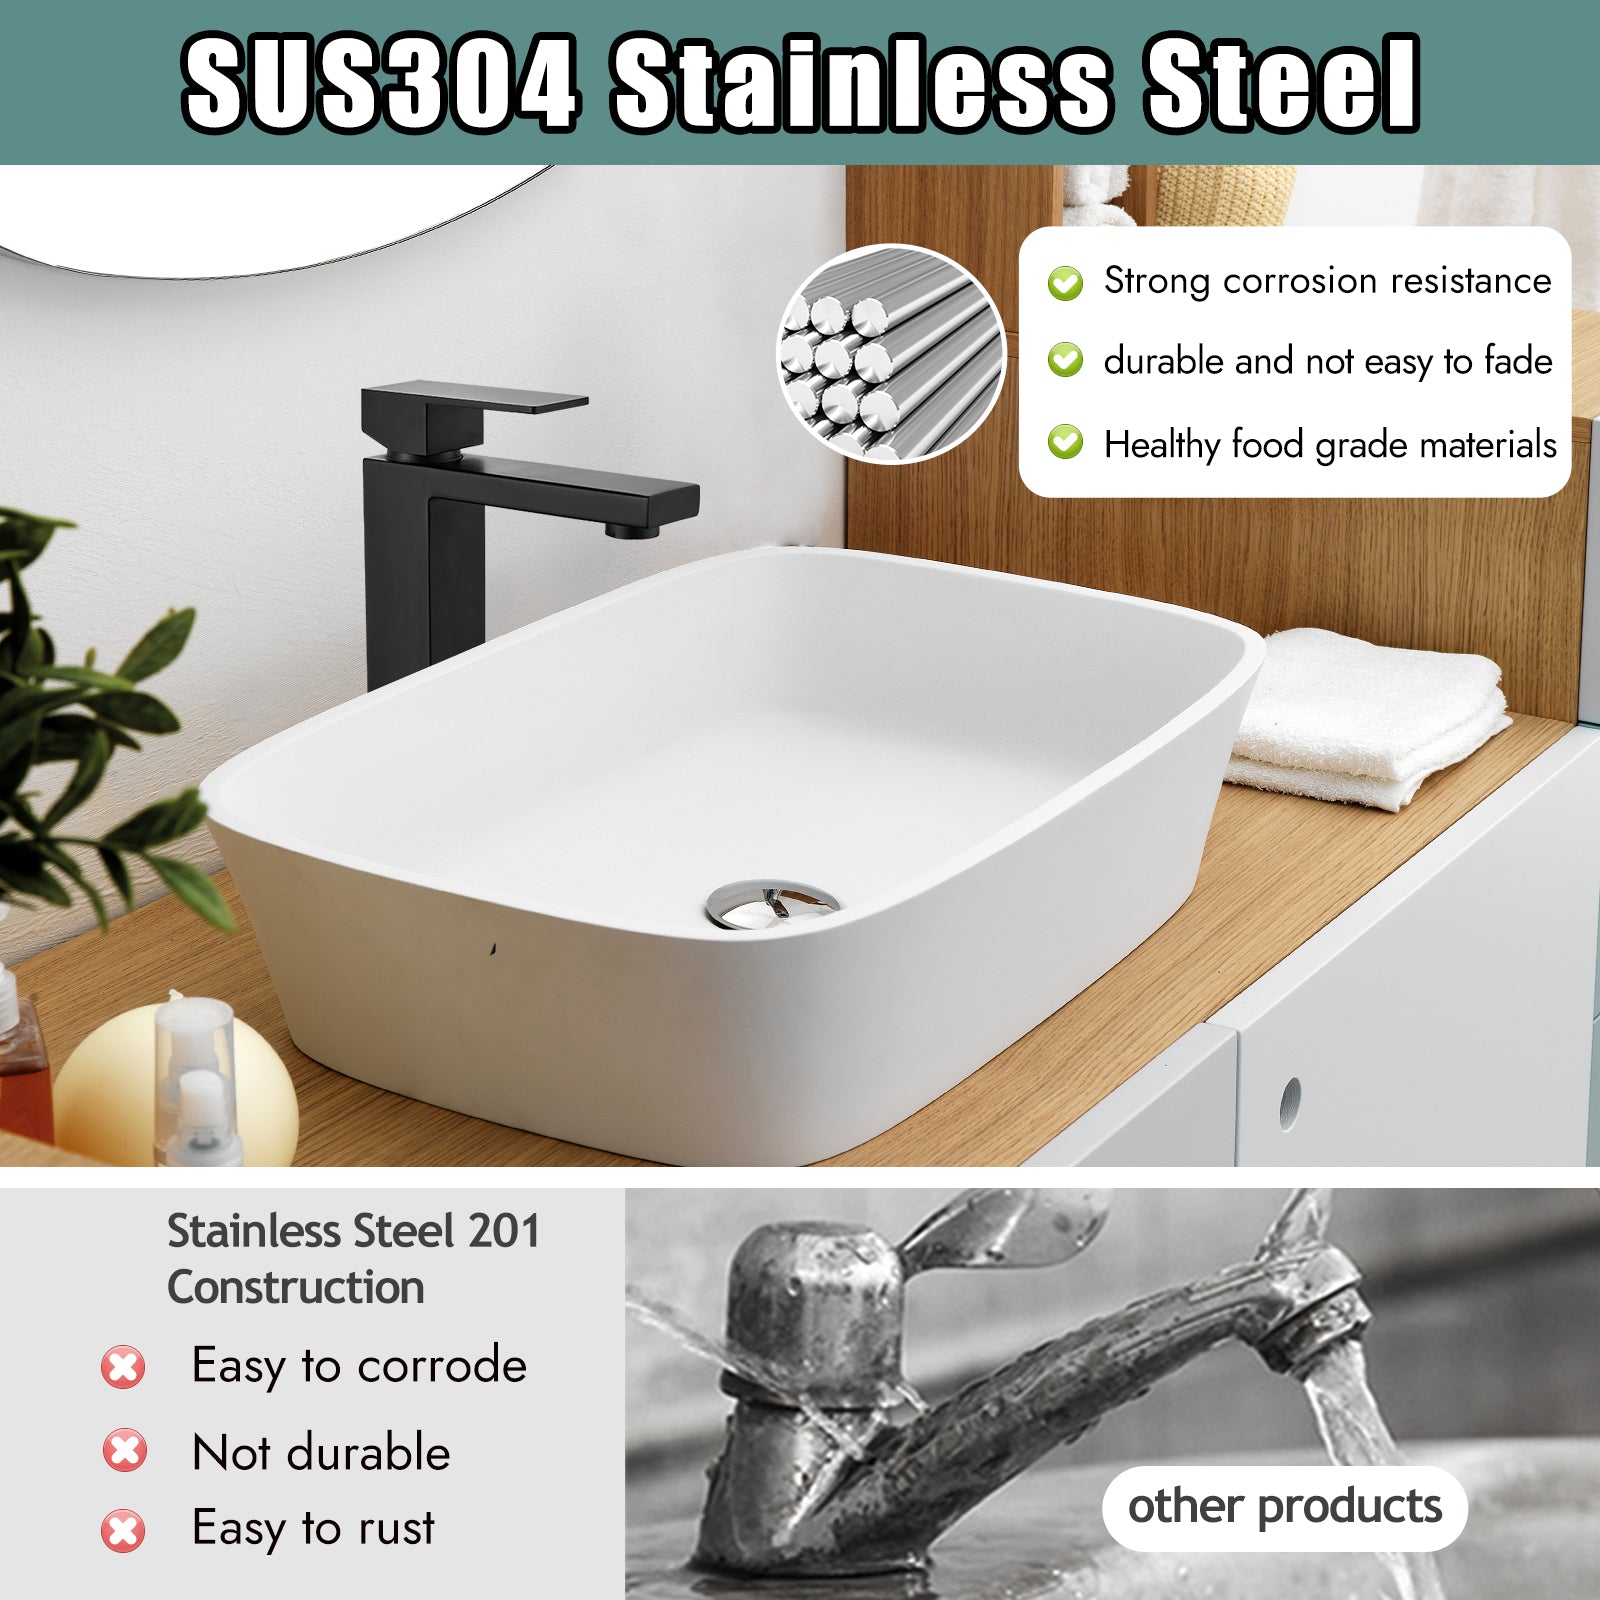 Black Bathroom Vessel Sink Faucet Single Handle Basin Bowl Tap SUS304 Stainless Steel Tall Body 1 Hole Lavatory Vanity Mixer Bar Tap Tall Spout Deck Mount